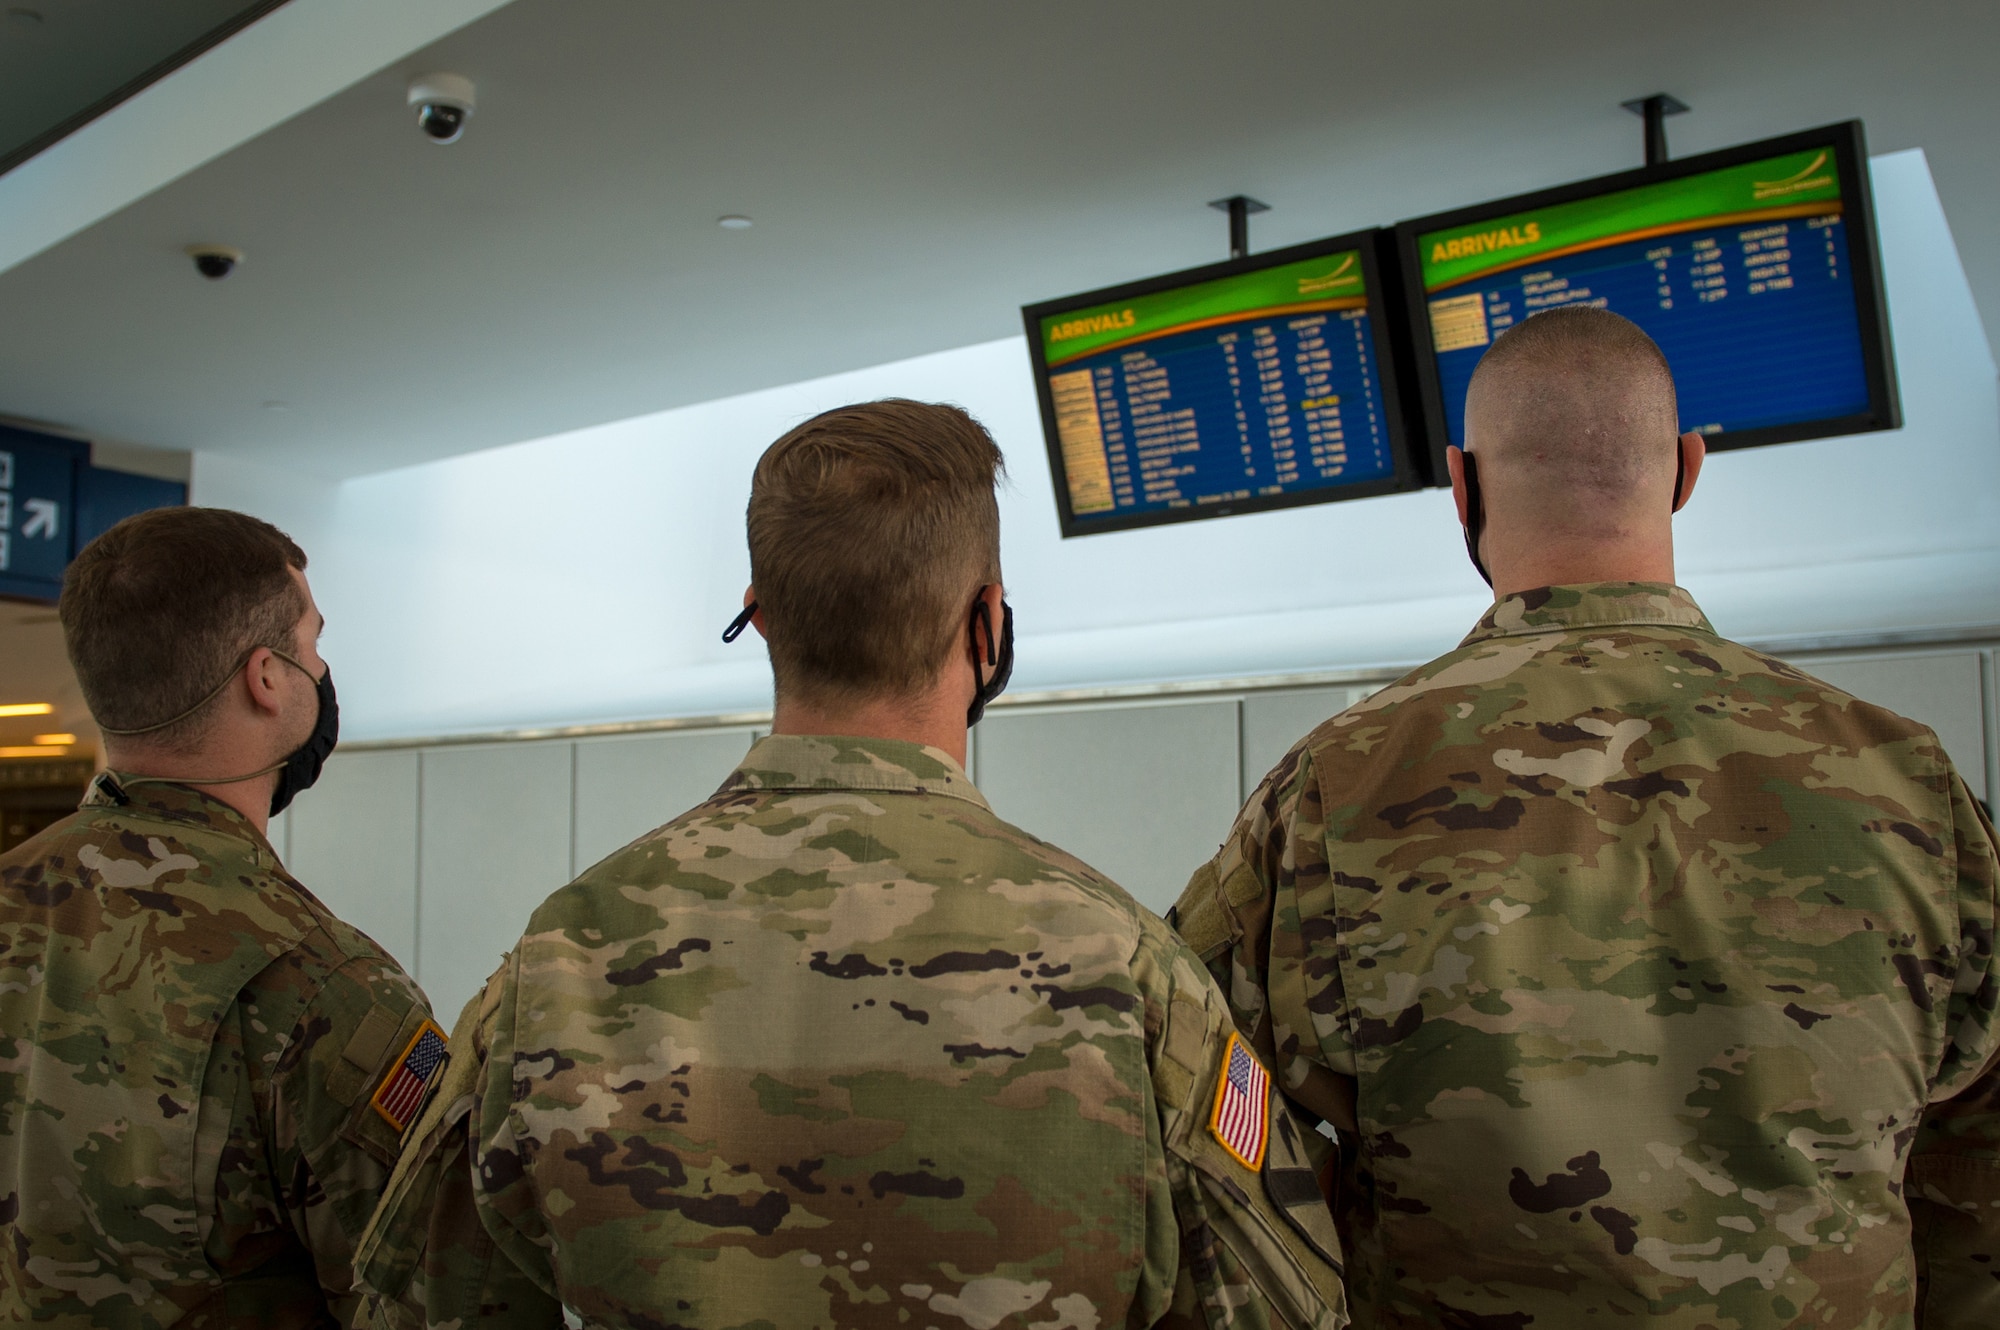 Army Spc. Kevin Hamilton, Sgt. Benjamin Zawacki and Staff Sgt. James Kociencki, Soldiers assigned to 105th Military Police Company, Buffalo, N.Y., check the arrival boards at Buffalo-Niagara International Airport, supporting the state’s travel advisory Oct. 23, 2020. The team meets arriving passengers to distribute the State Department of Health traveler form to travelers coming from restricted states.